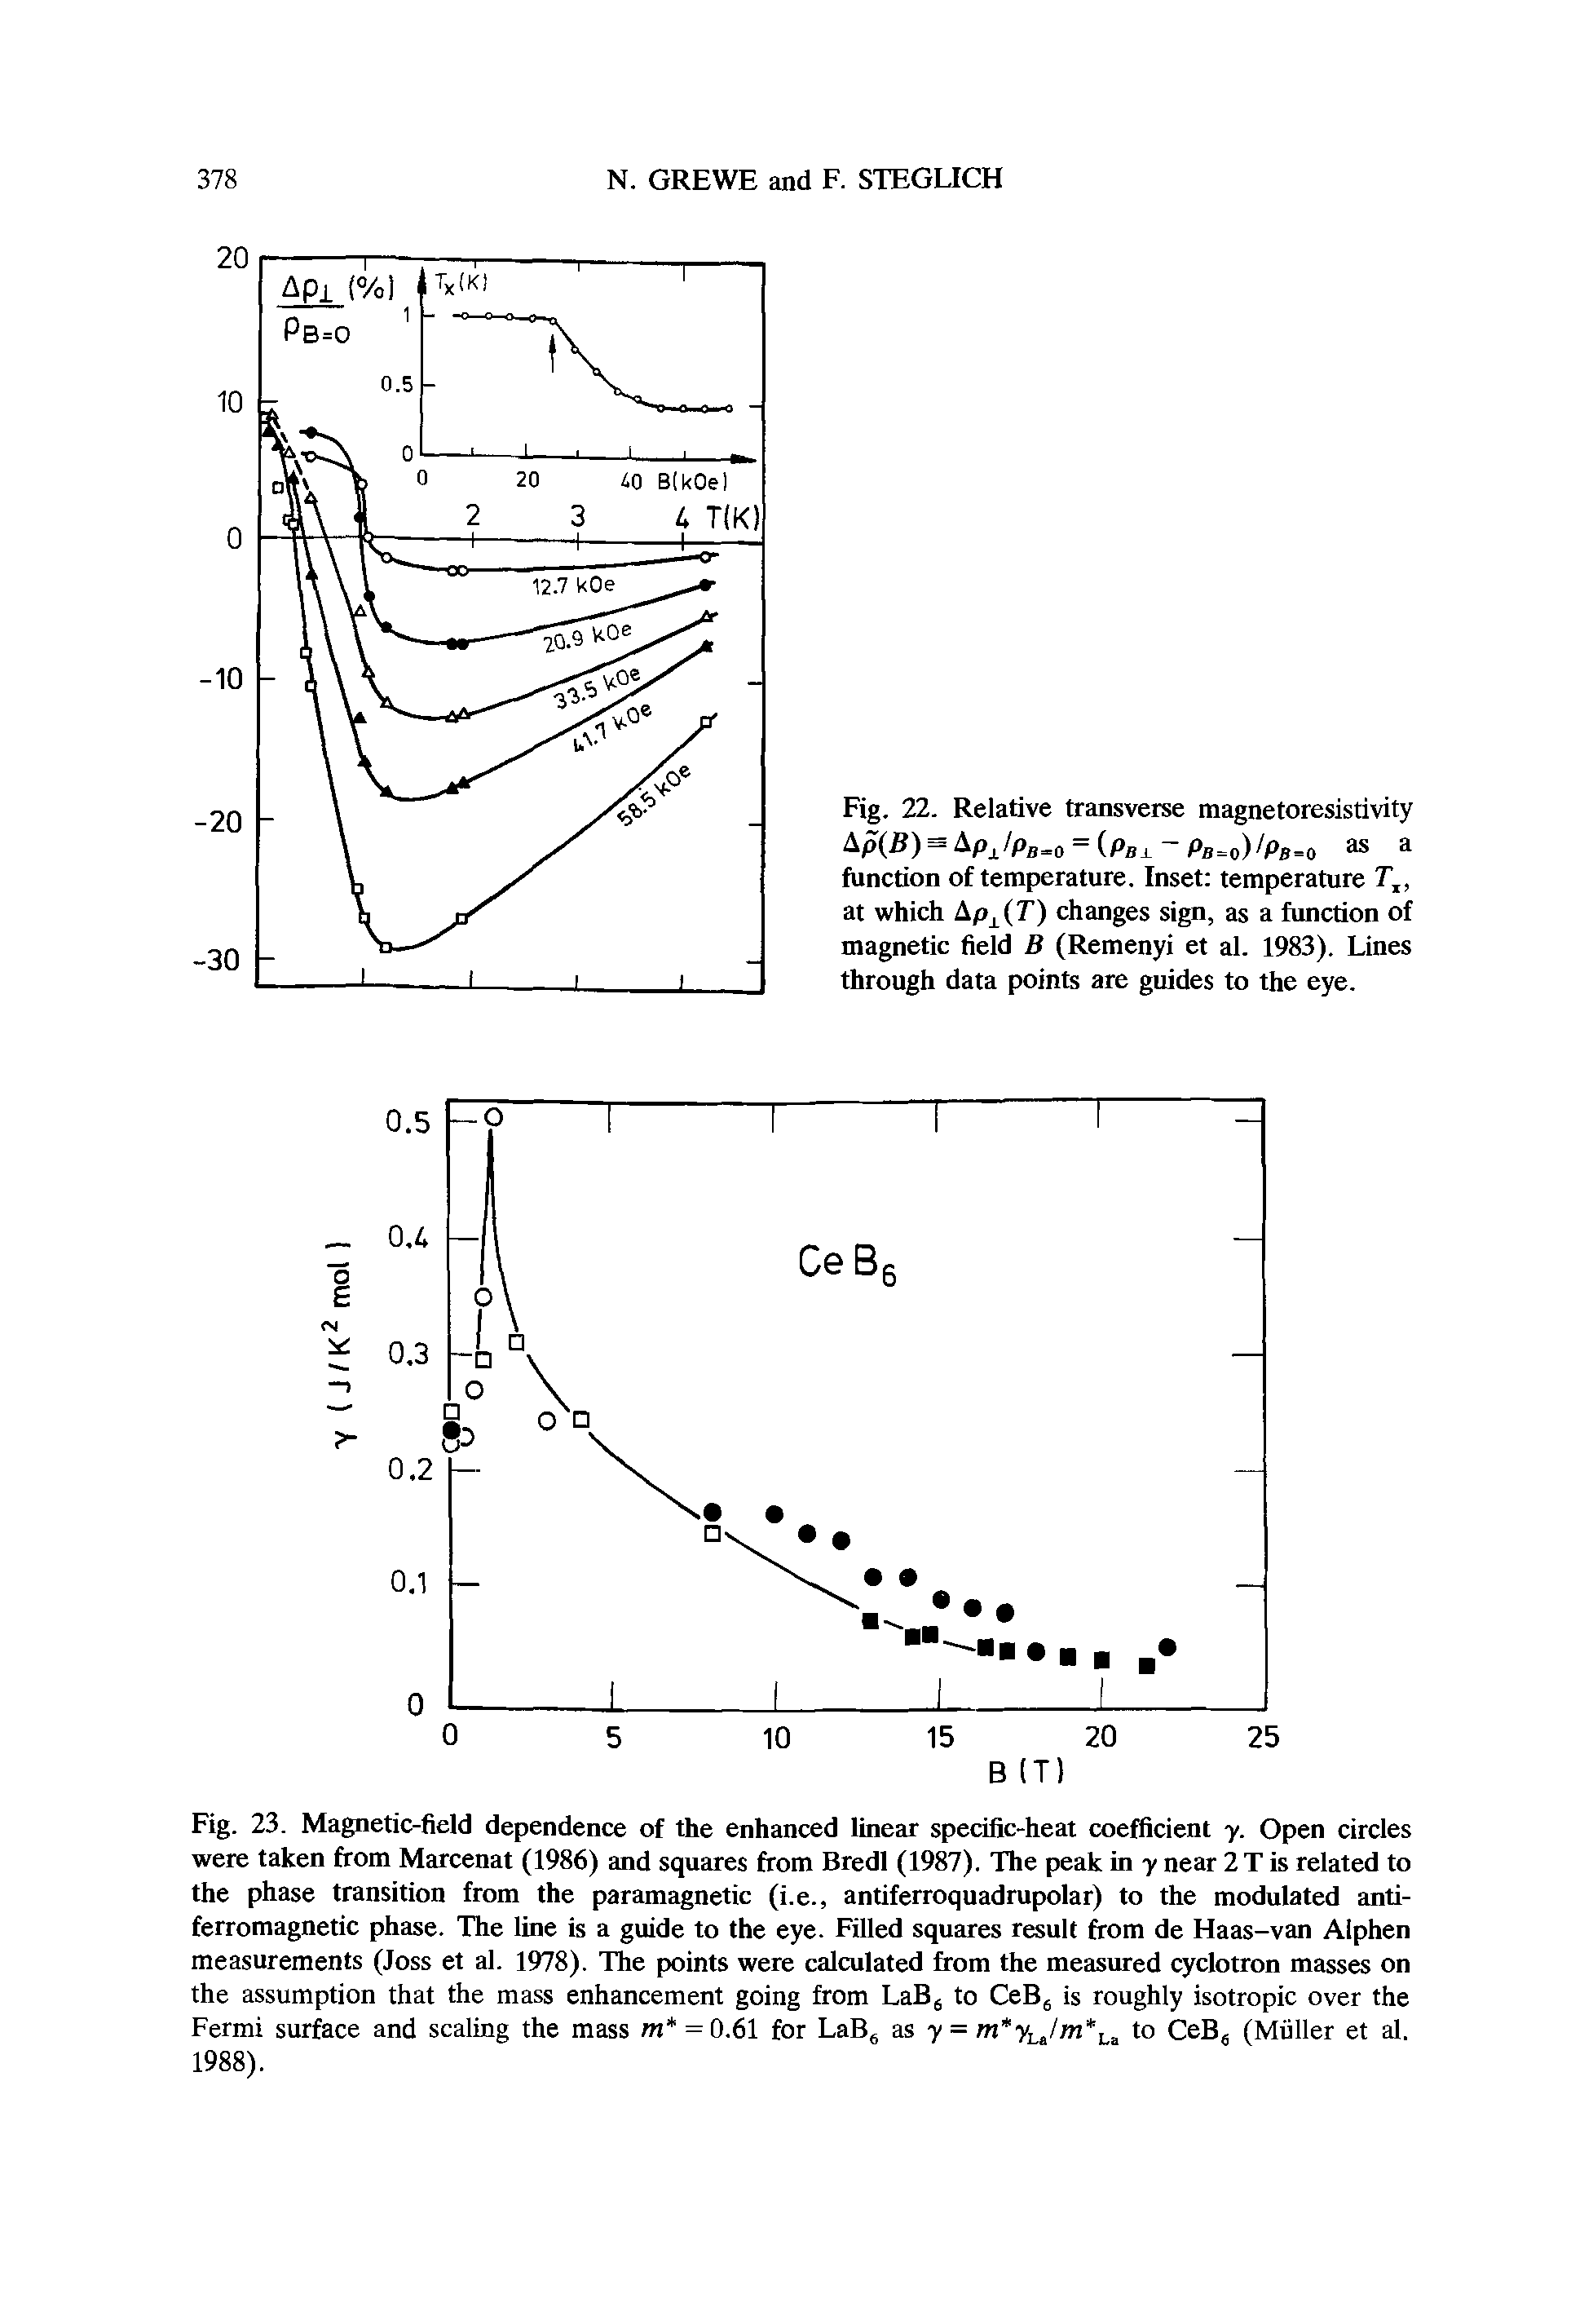 Fig. 22. Relative transverse magnetoresistivity Ap(B) = Apjps.o = Pb pB o)/p8-o as a function of temperature. Inset temperature T, at which p T) changes sign, as a function of magnetic field B (Remenyi et al. 1983). Lines through data points are guides to the eye.